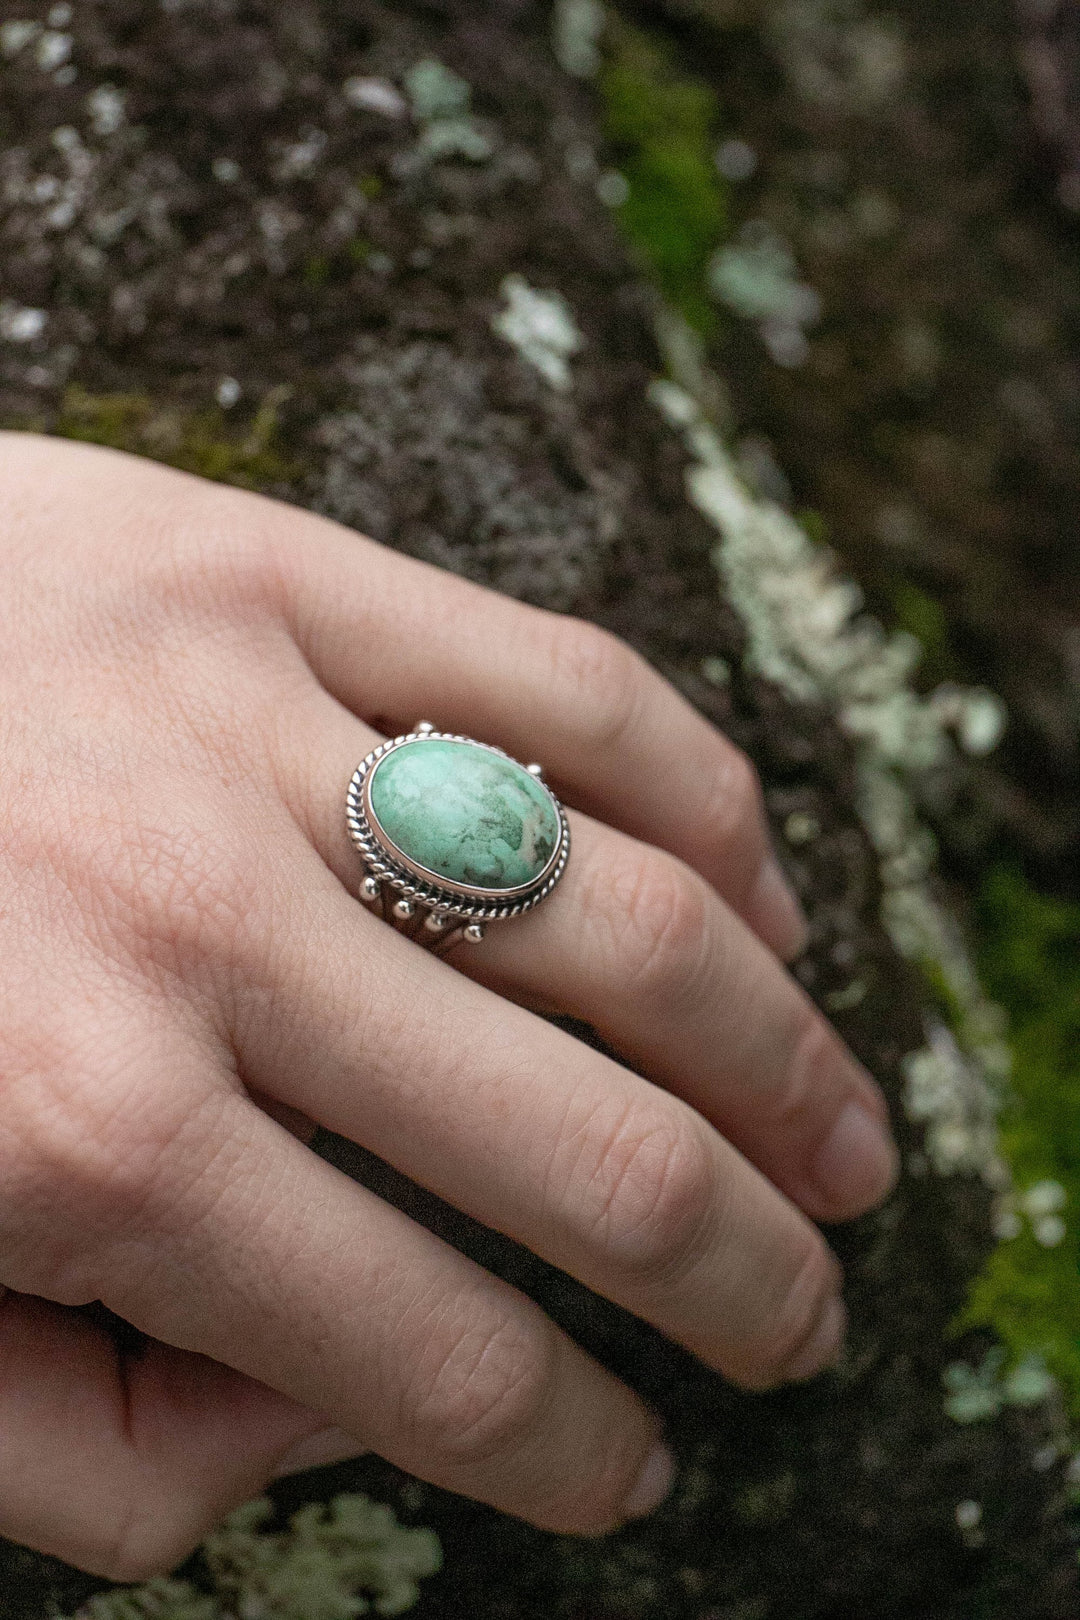 Variscite Ring in Tribal Sterling Silver Setting - Size 6.5 US